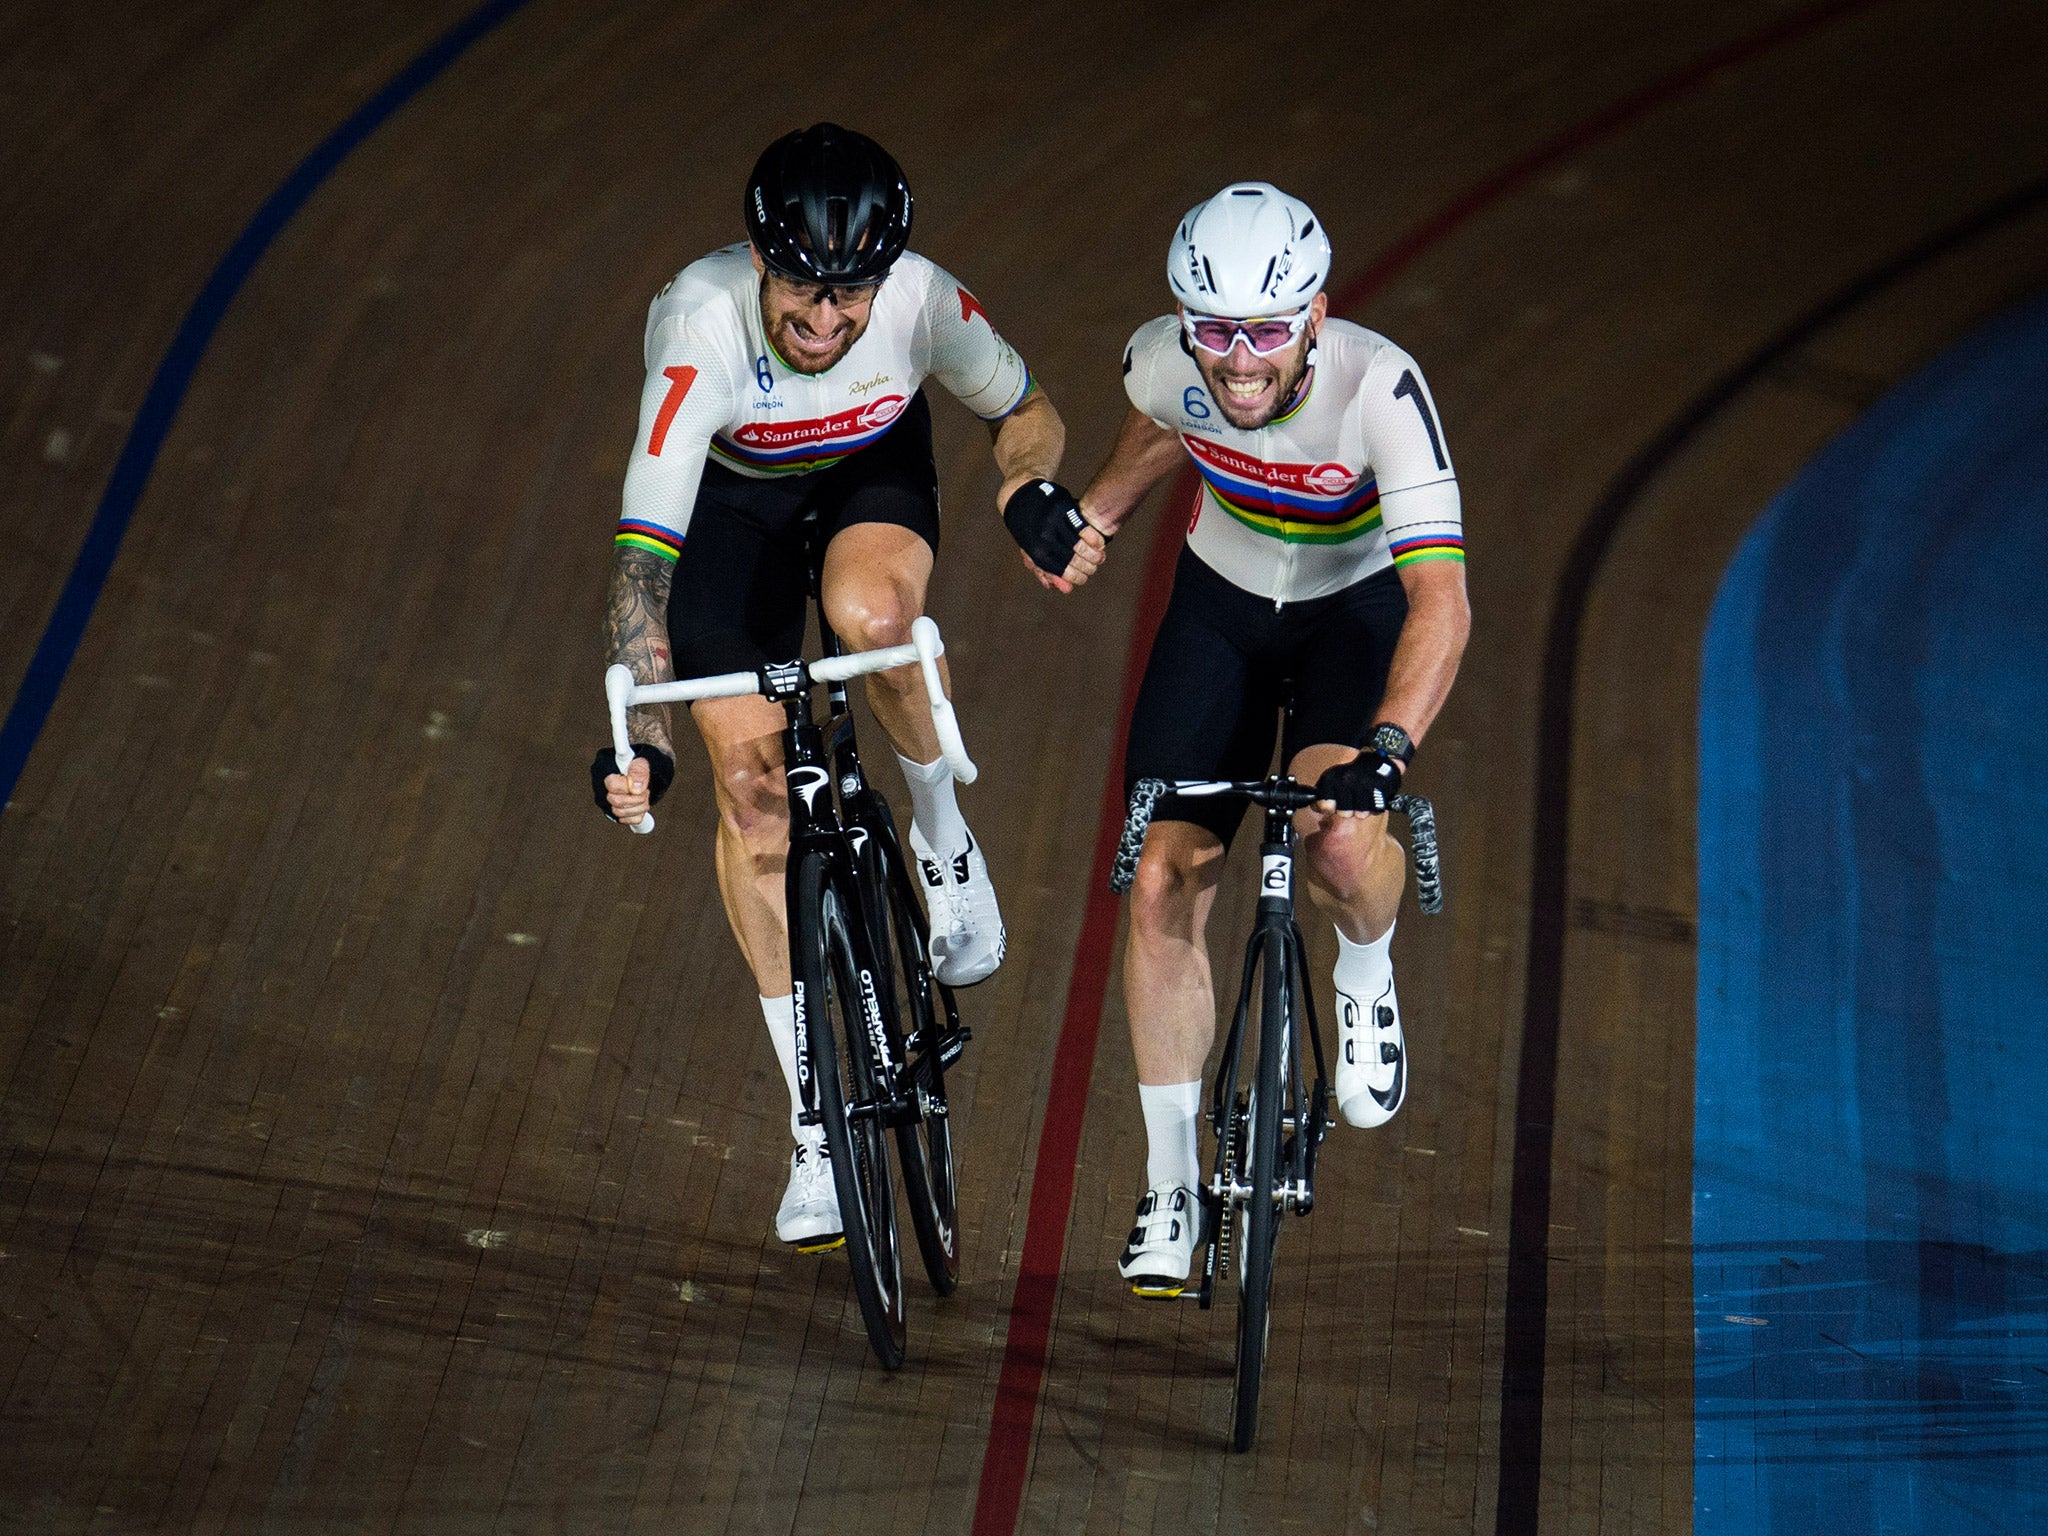 Wiggins and Cavendish were roared on by the home British crowd at Lee Valley VeloPark